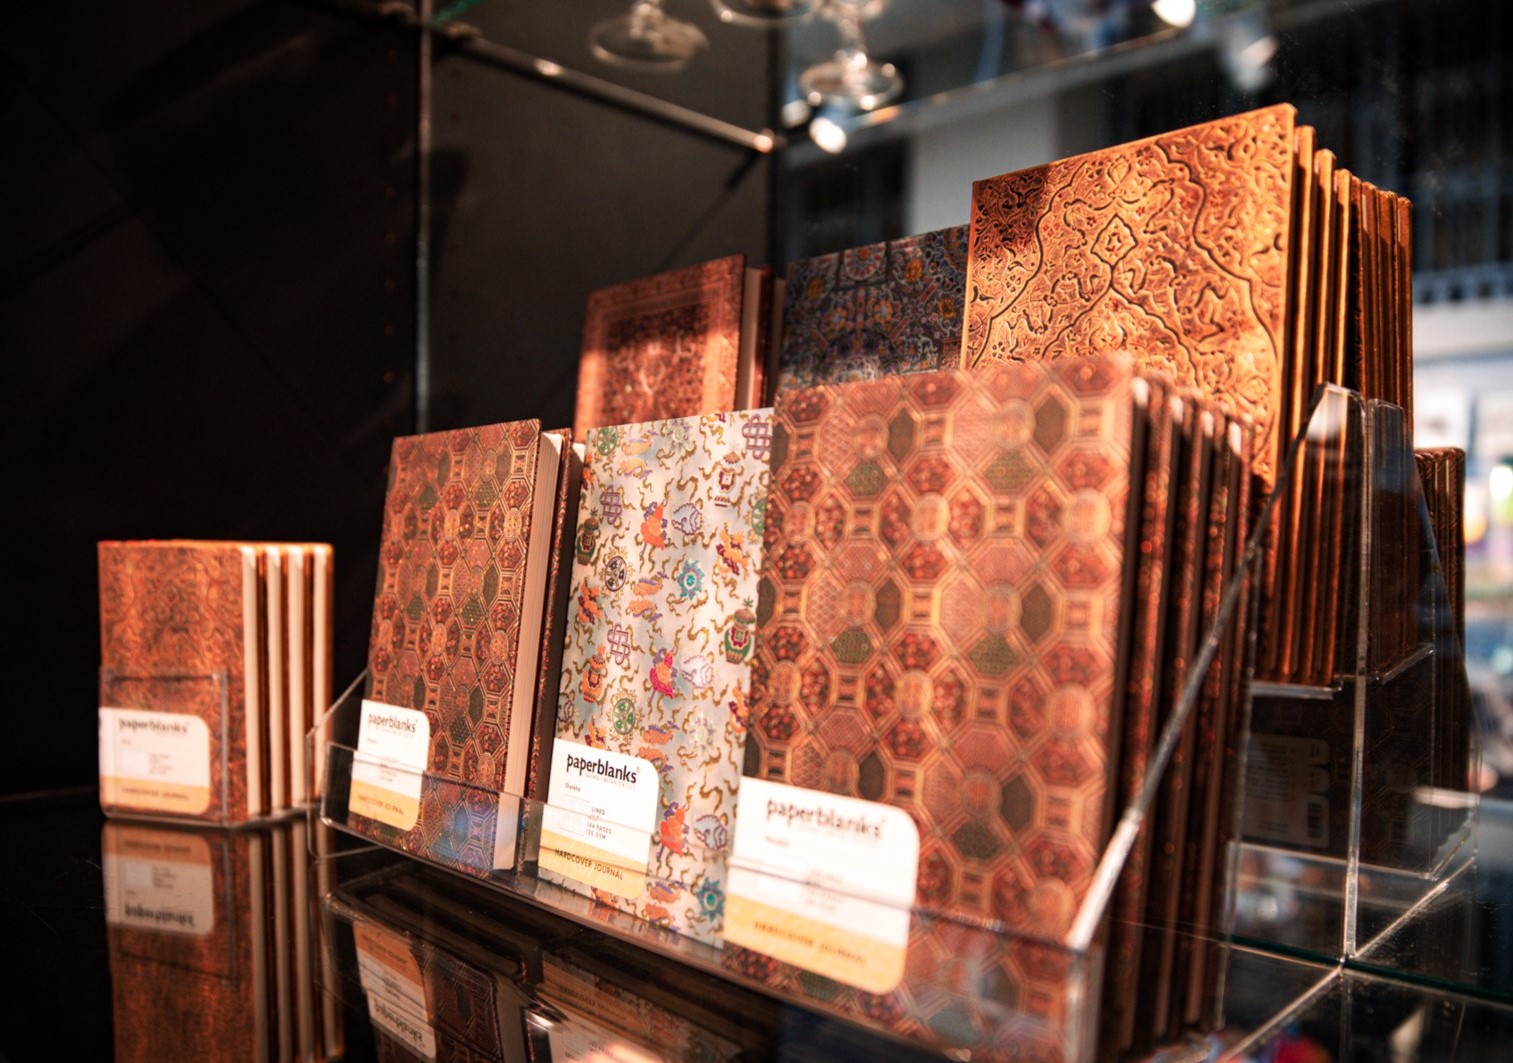 Display of journals with gold patterned covers